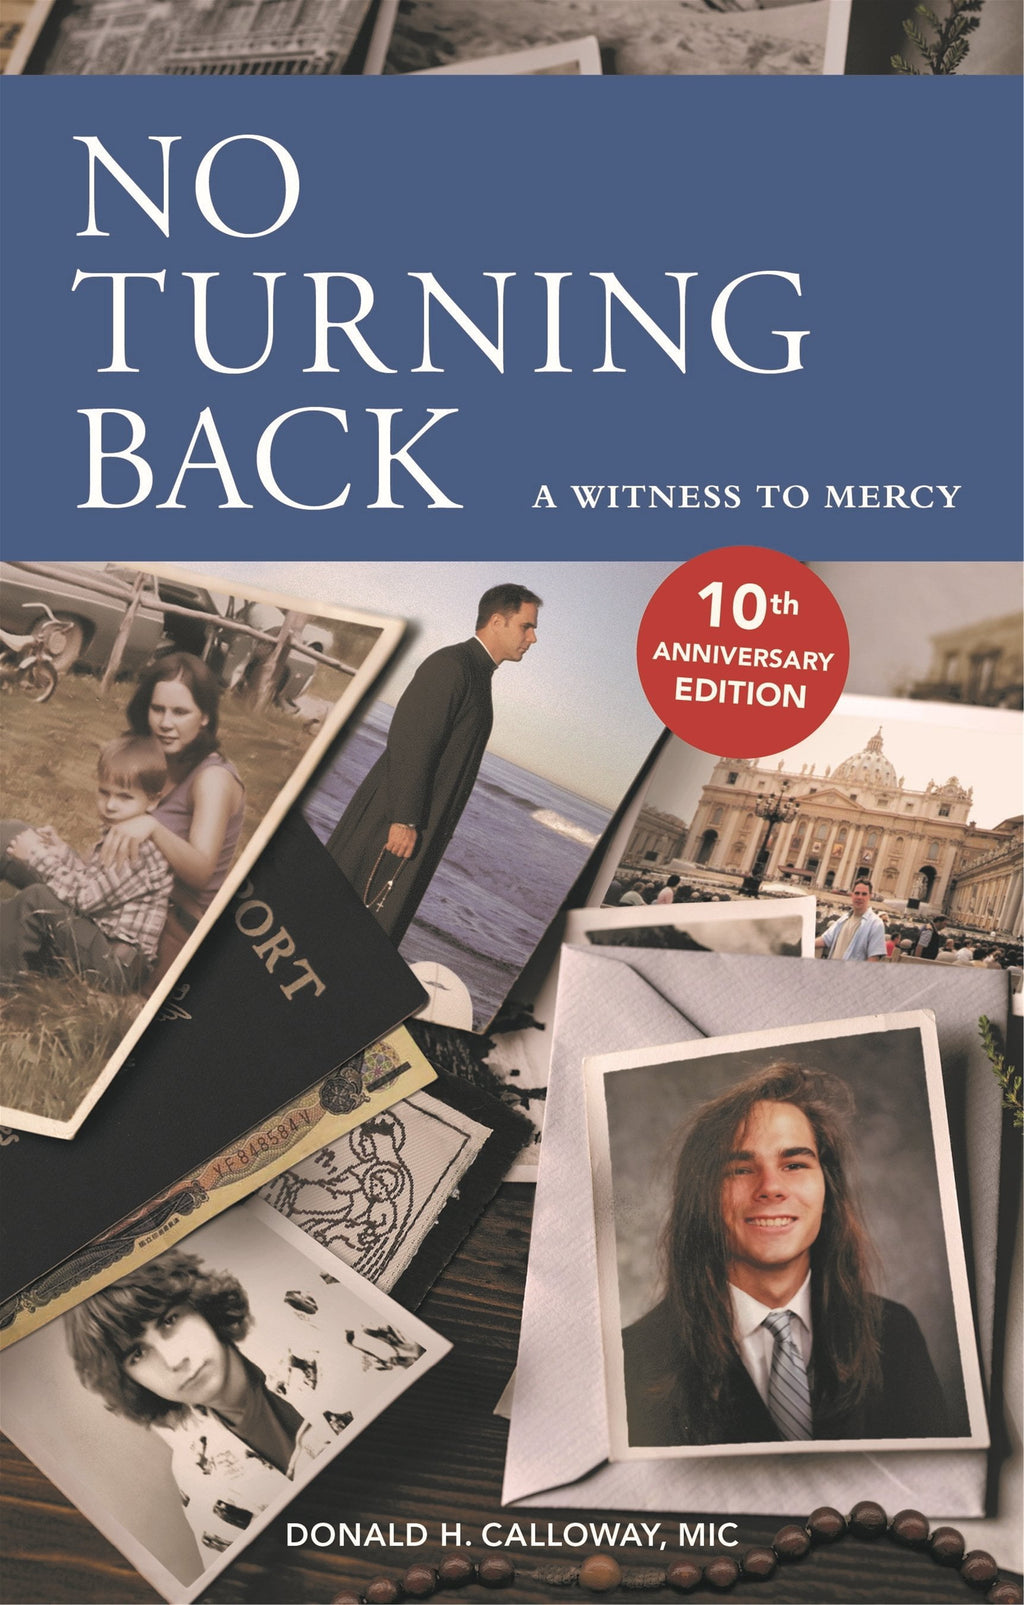 No Turning Back: A Witness to Mercy by Fr. Donald Calloway (10th Anniversary Edition) - Unique Catholic Gifts